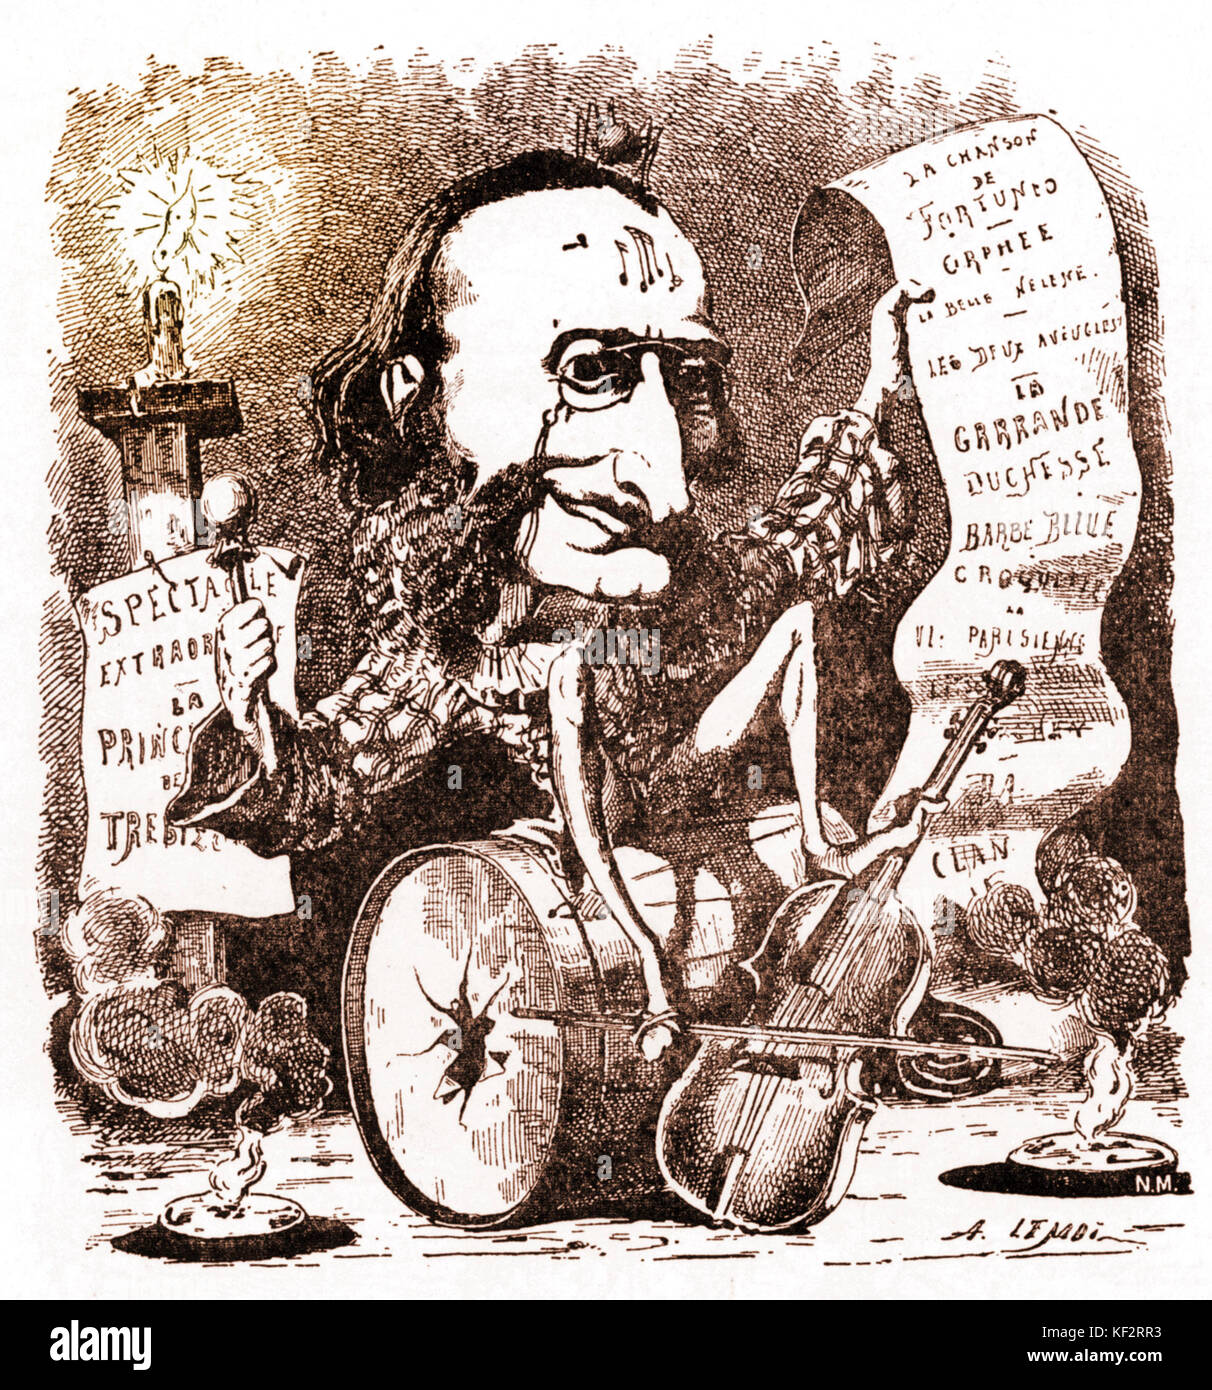 OFFENBACH, Jacques Contemporary French caricature.  Offenbach composing and playing violin with his works all around himGerman/French Composer (1819-1880) Stock Photo